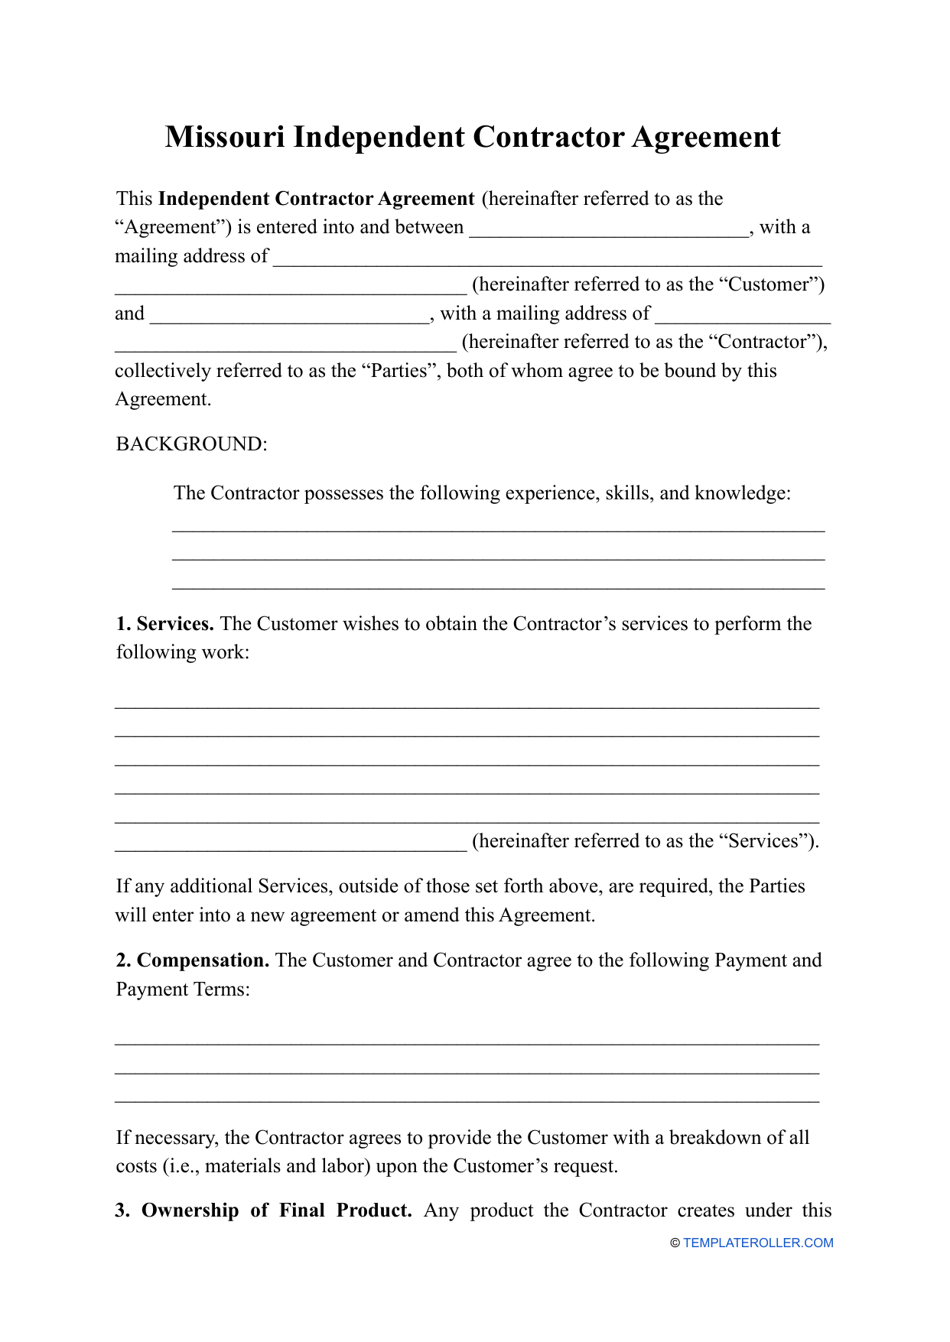 Independent Contractor Agreement Template - Missouri, Page 1